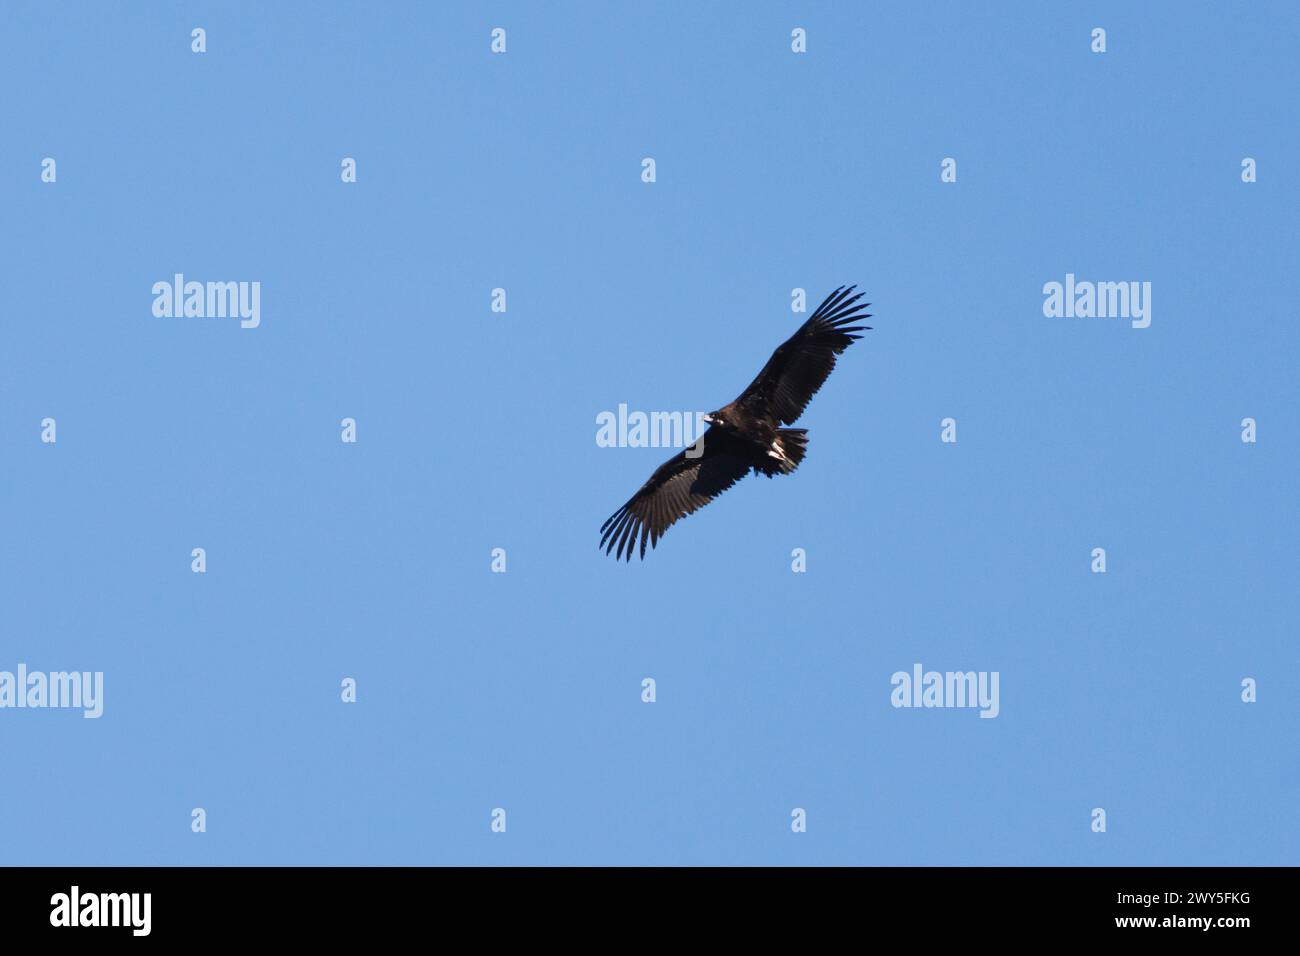 Black vulture, Aegypius monachus, flying with blue sky background, Alcoy, Spain Stock Photo